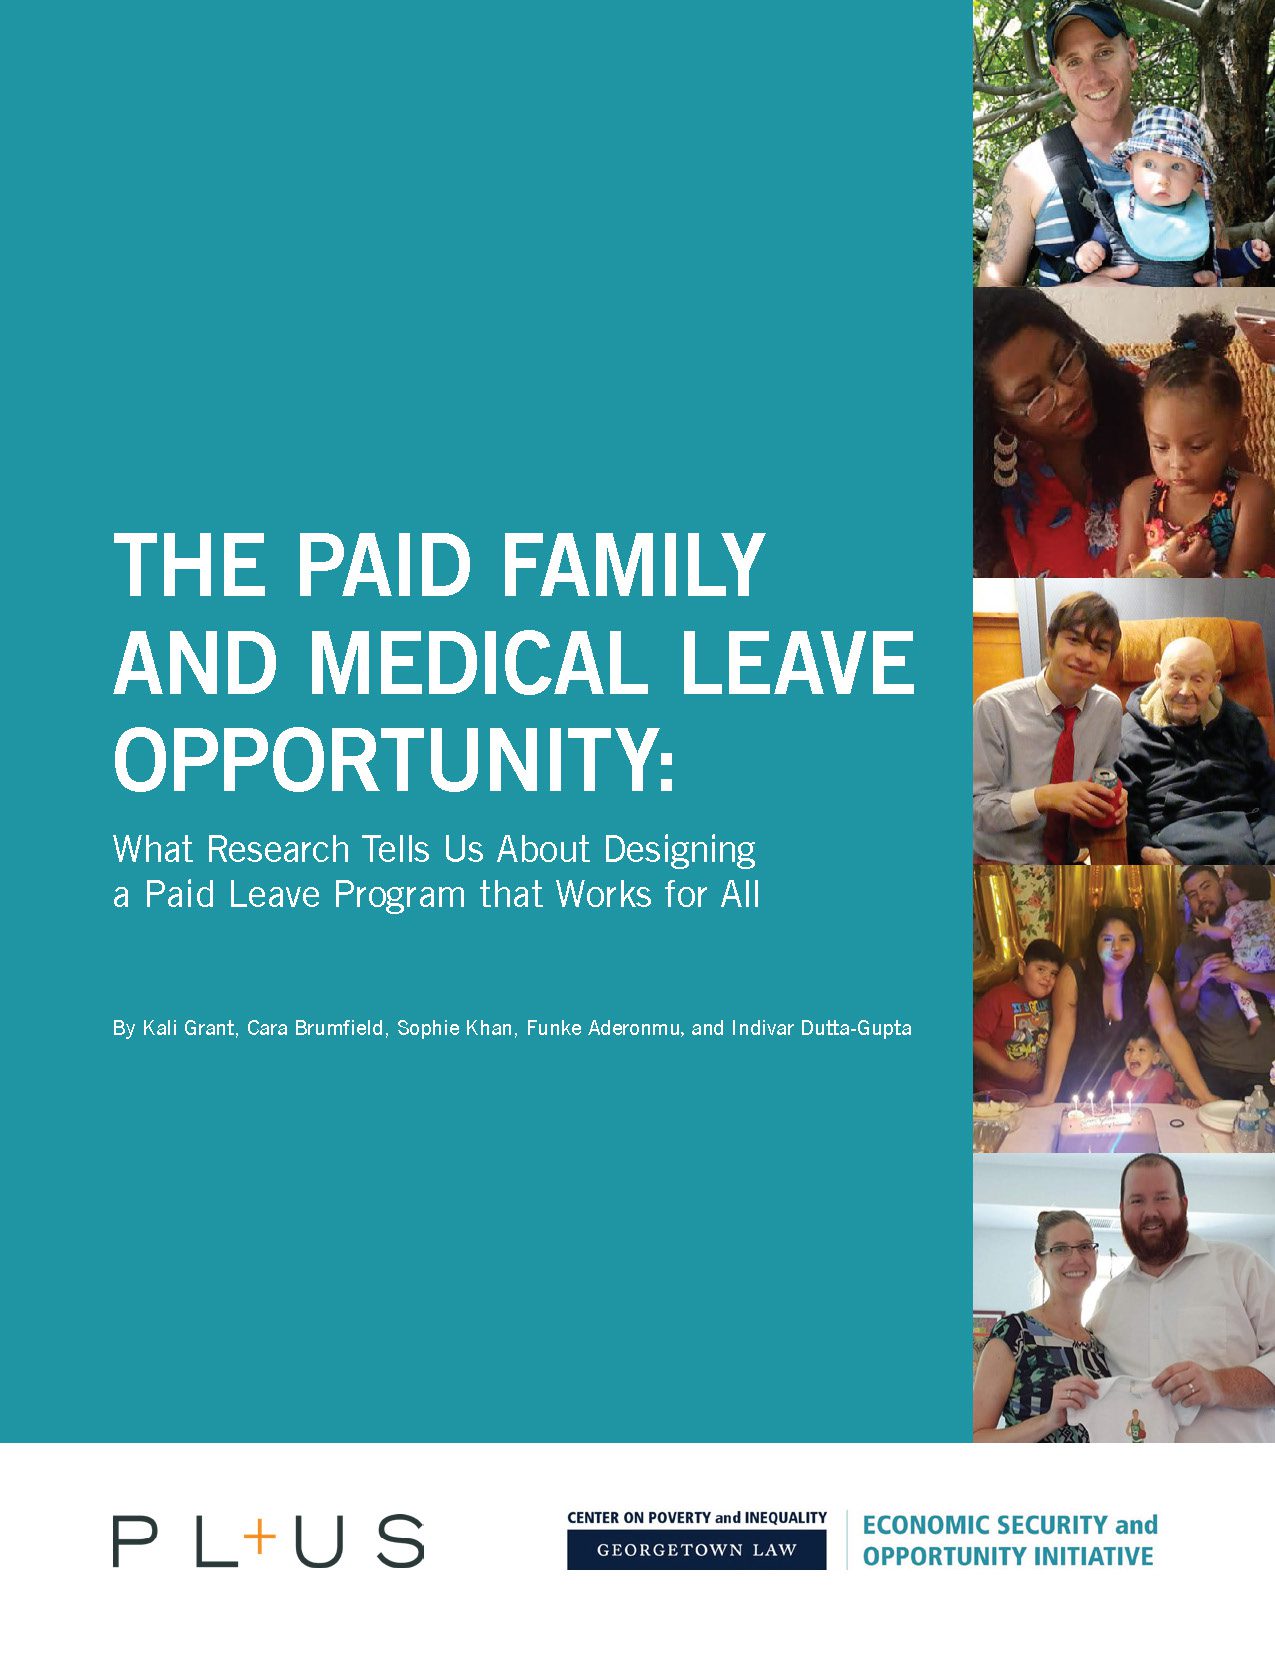 A picture to the cover of a report with the title, "The paid family and medical leave opportunity: What research tells us about designing a paid leave program that works for all." The cover has 5 picture of 5 different families in a column on the right hand side of the cover.